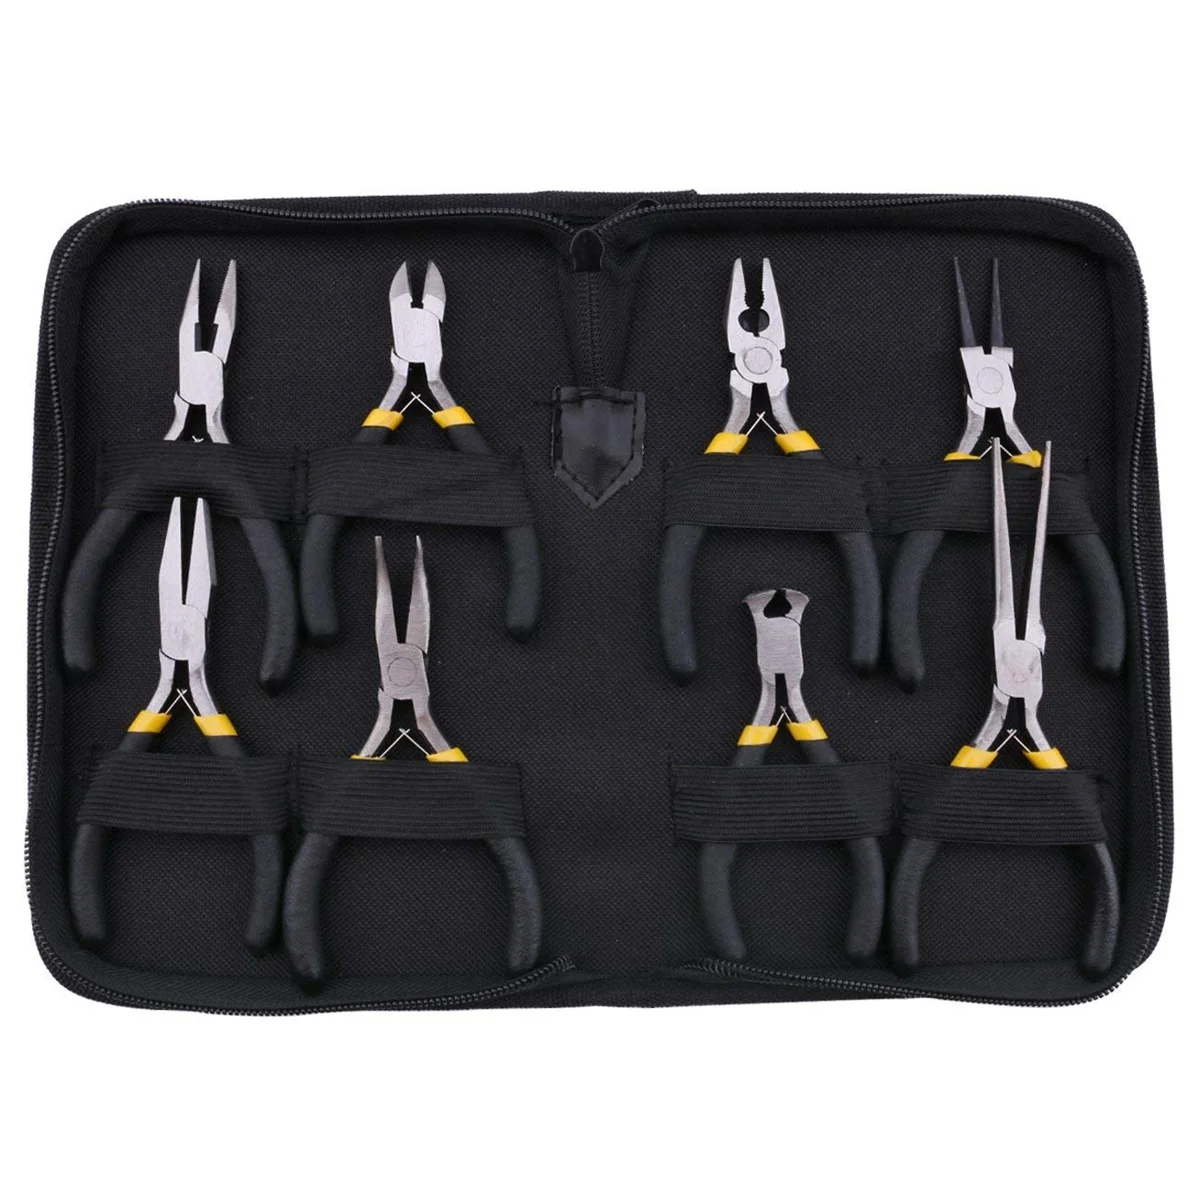 

8PCs Mini Pliers Set, Long Nose with Teeth, Flat Jaw, Round Curve Needle Diagonal Nose Wire End Cutting Cutter Linesman Plier